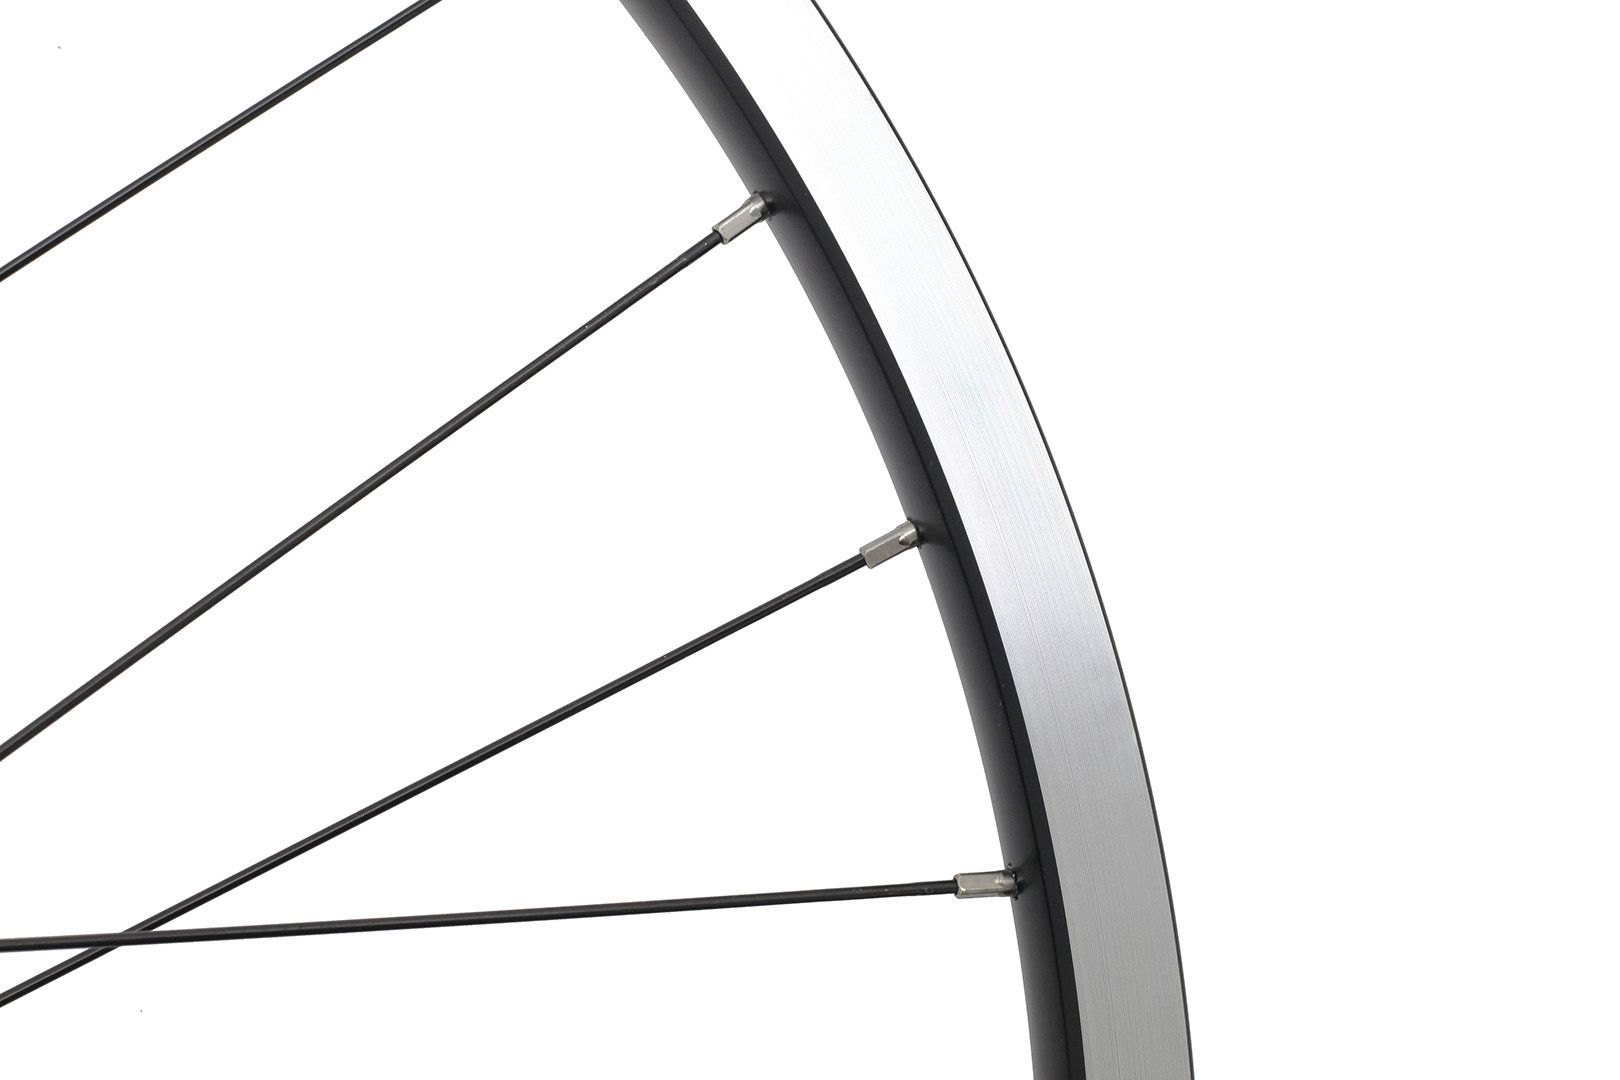 Tailored rim selection